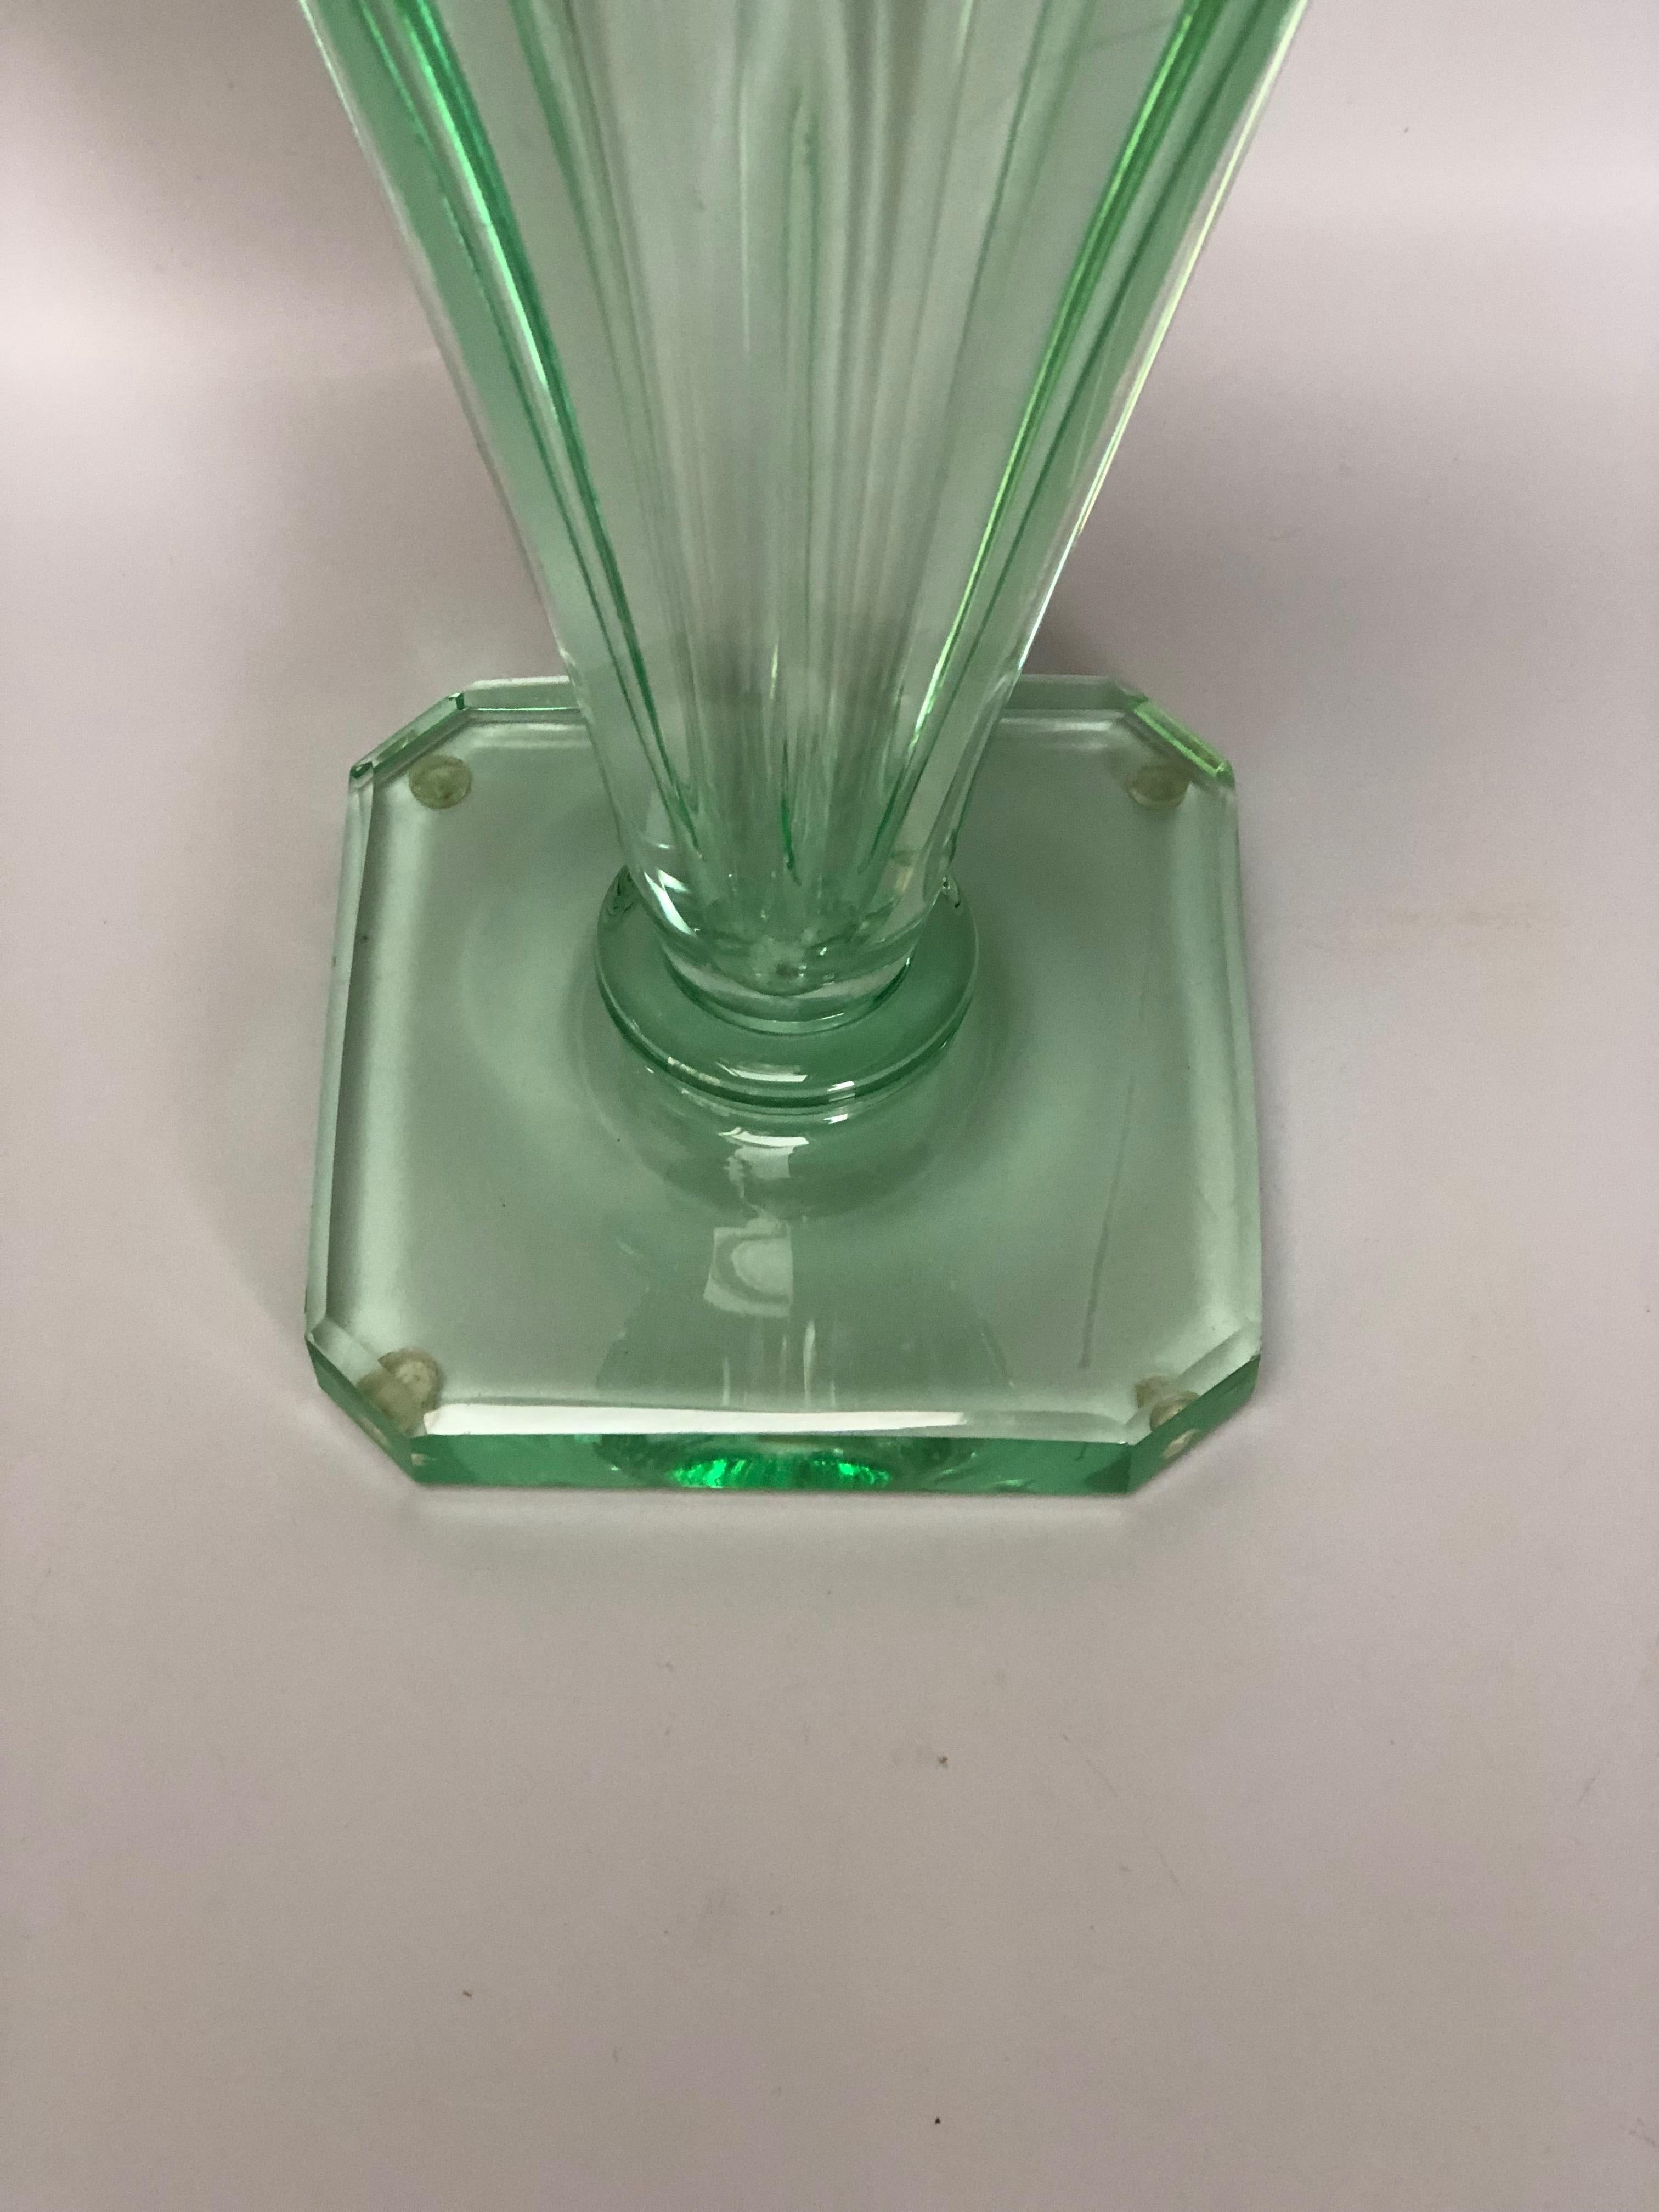 Art deco cone vase circa 1930 in green color.
Signed Daum Nancy France. In perfect condition
Note micro scratches inside

Height: 27.3 cm
Neck diameter: 14.5 cm
Base: 11.3cm x 11.3cm
Weight: 2.6 kg

Daum (French establishment created in 1878) is a